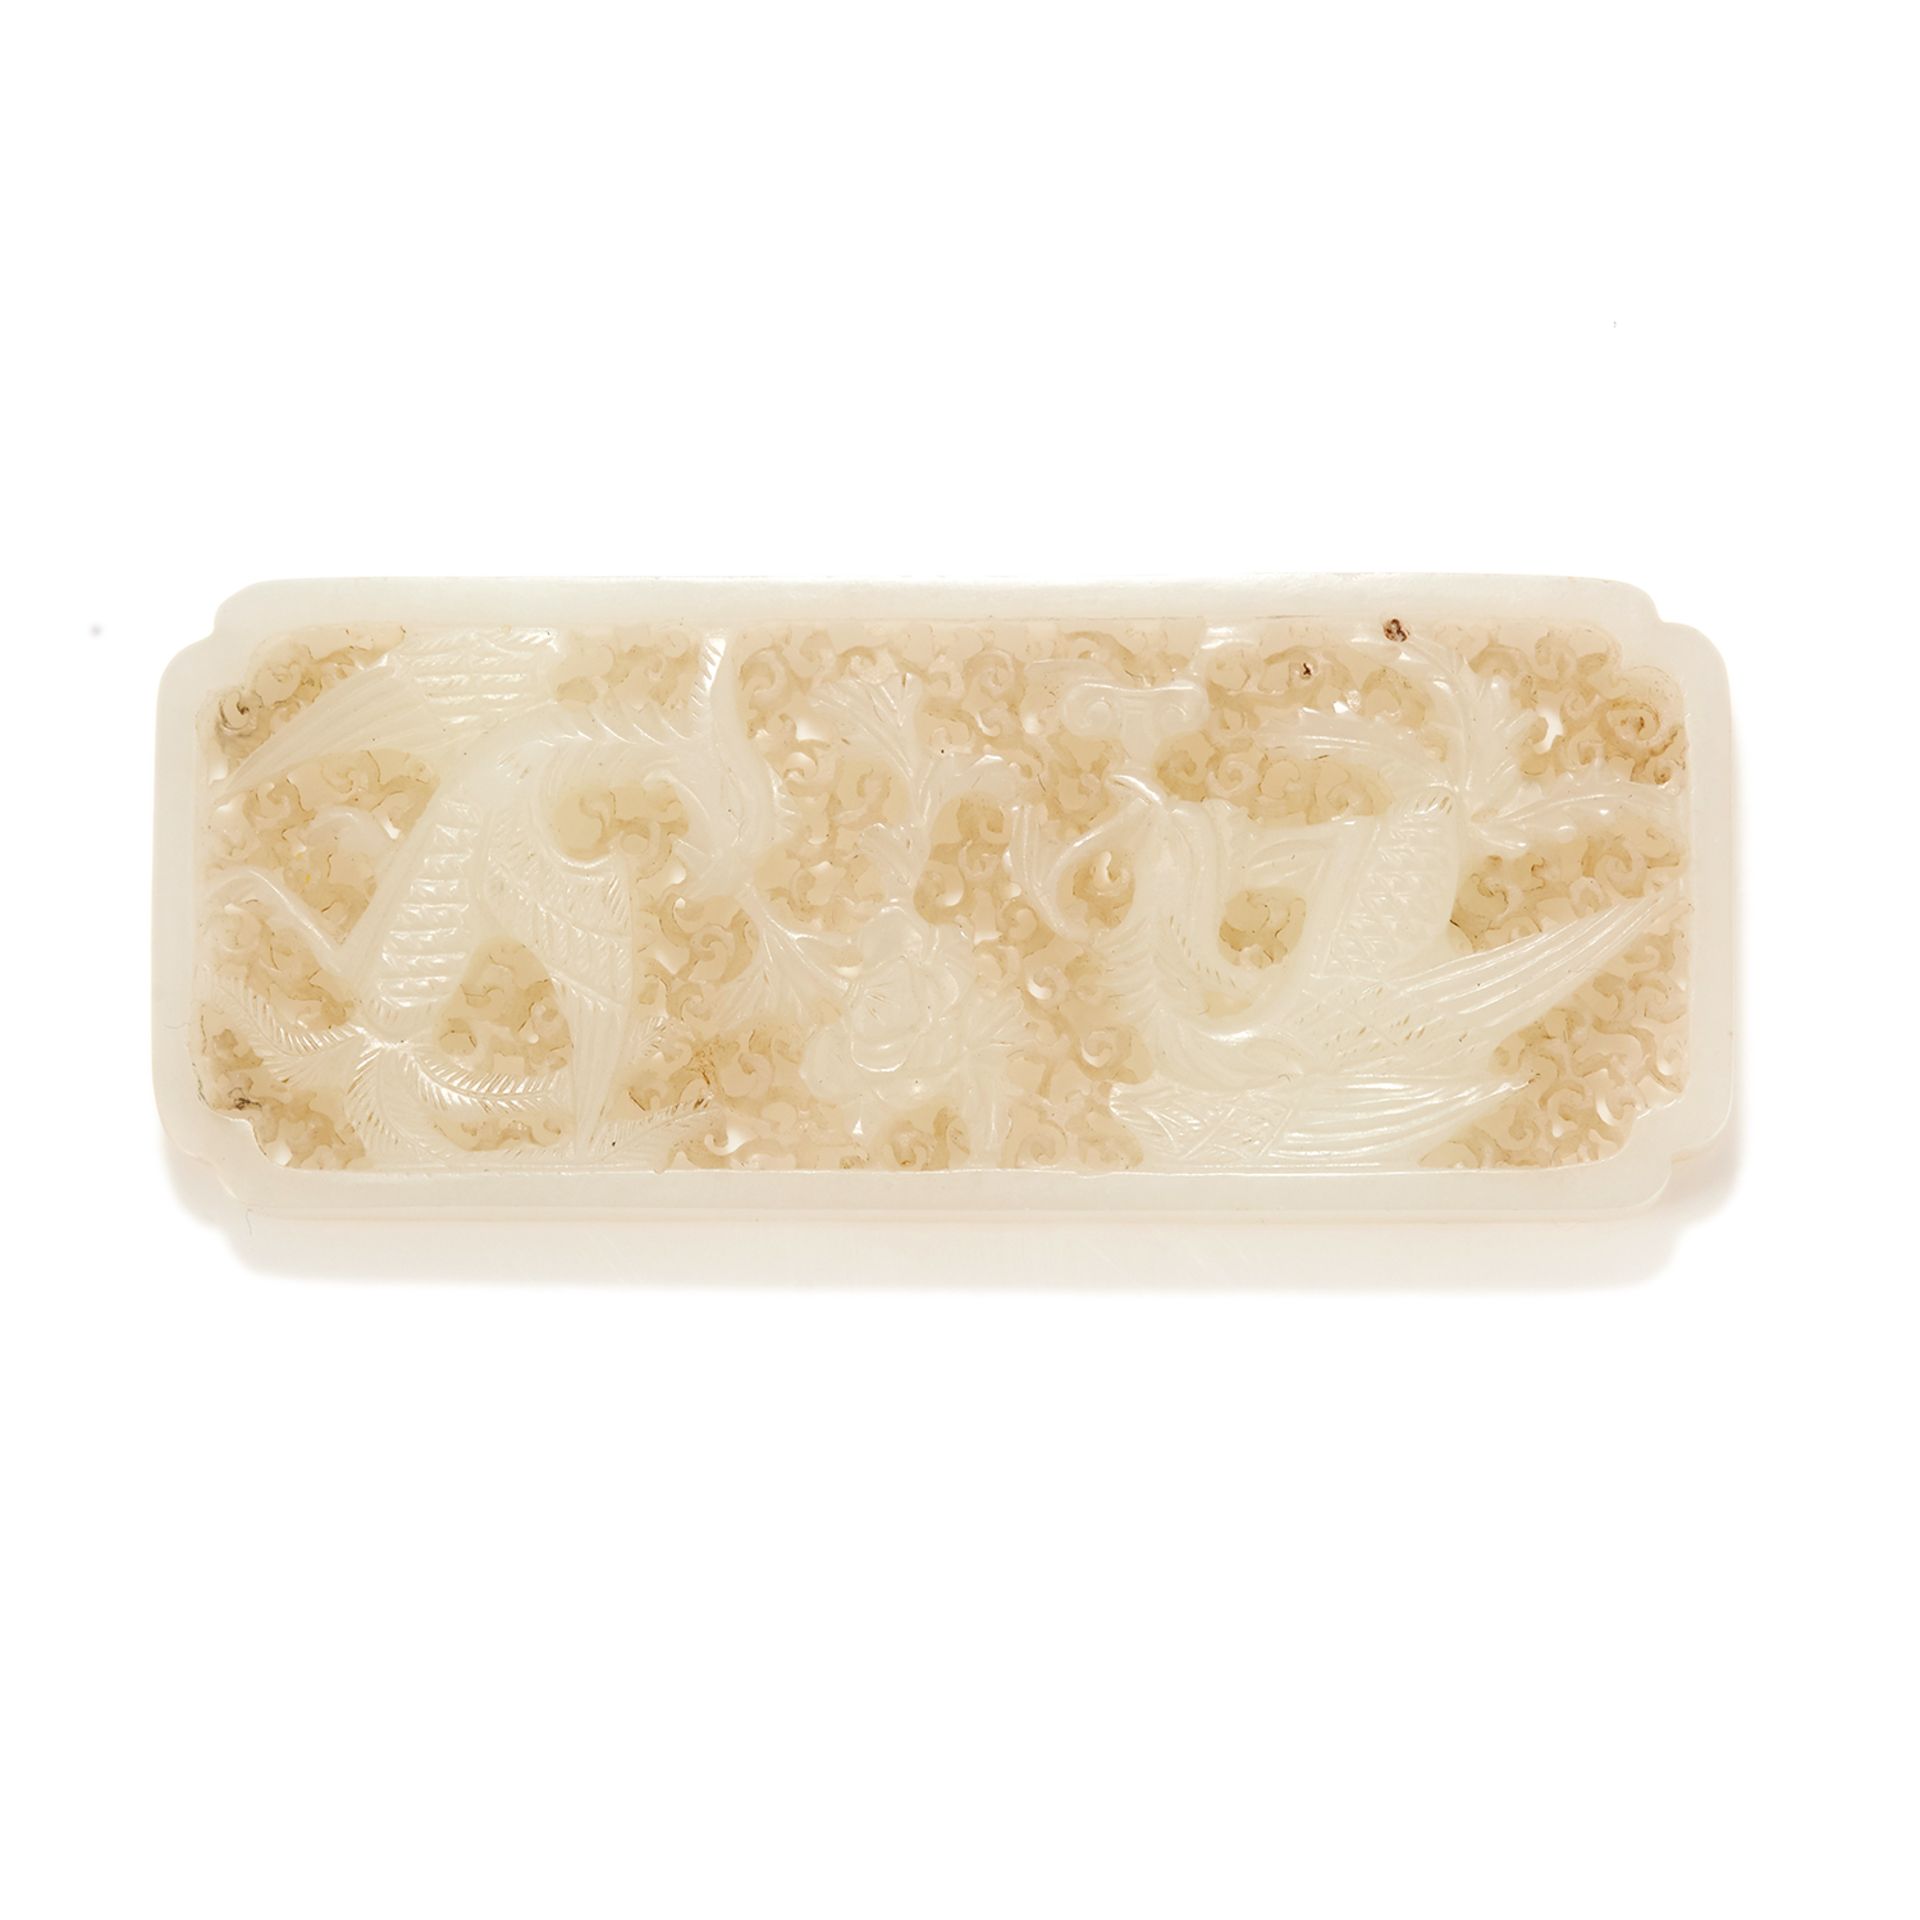 AN ANTIQUE CHINESE WHITE JADE PLAQUE, MING DYNASTY 15th Century or later of rectangular form, carved